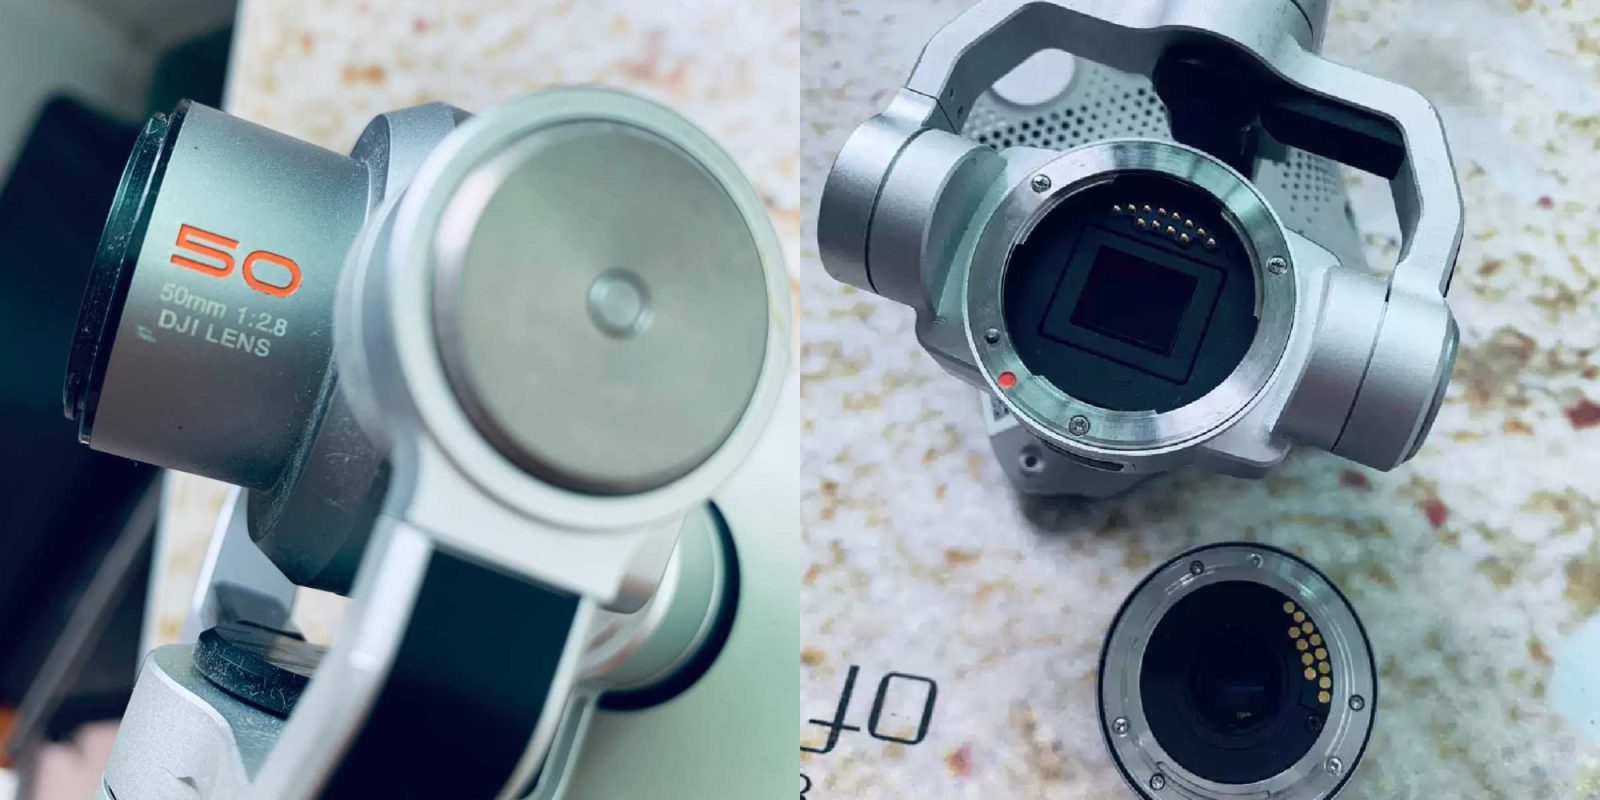 DJI camera with interchangeable lens system